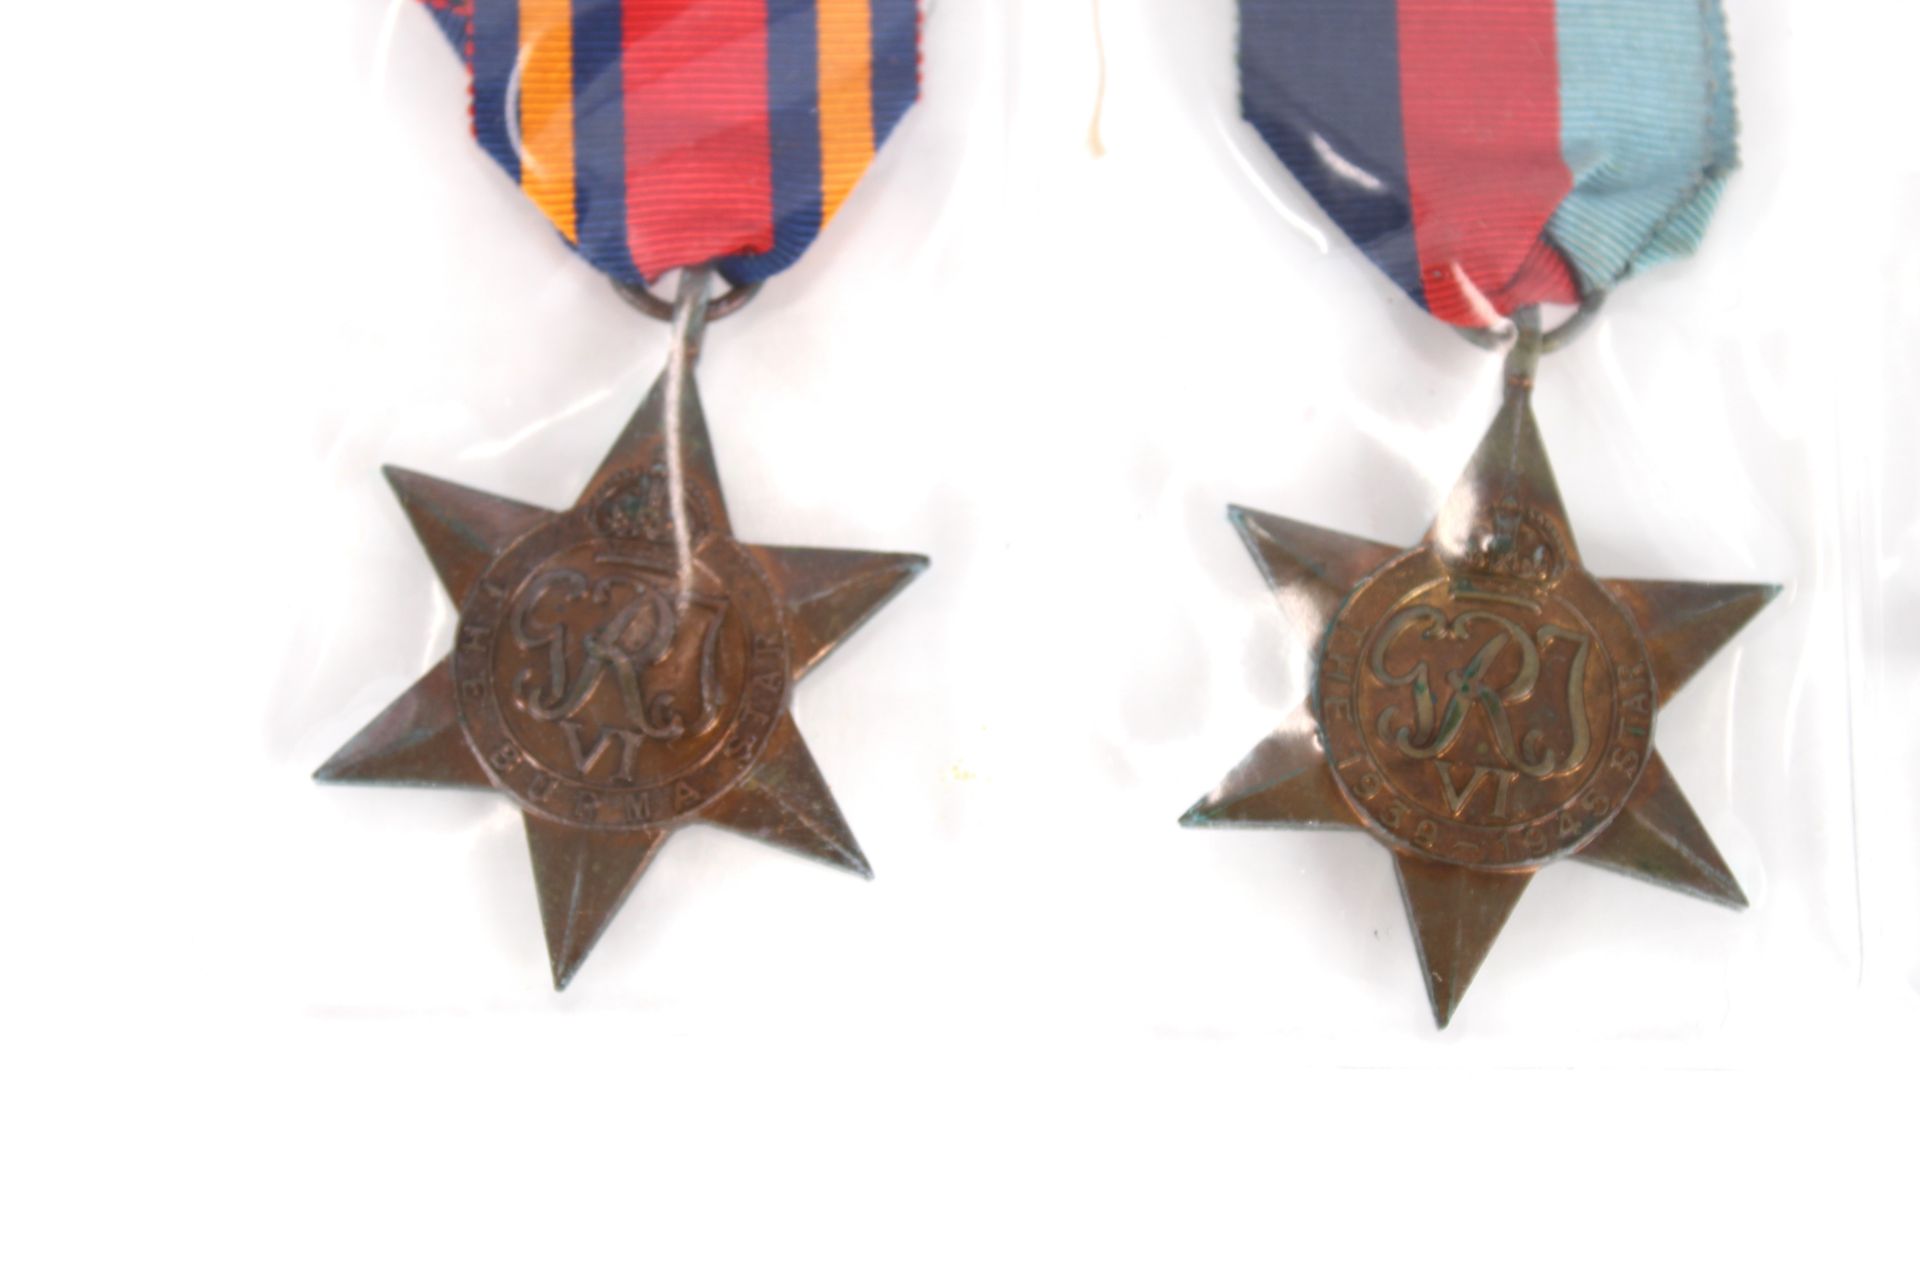 Six WWII medals including Italy and 39/45 Stars - Image 4 of 7